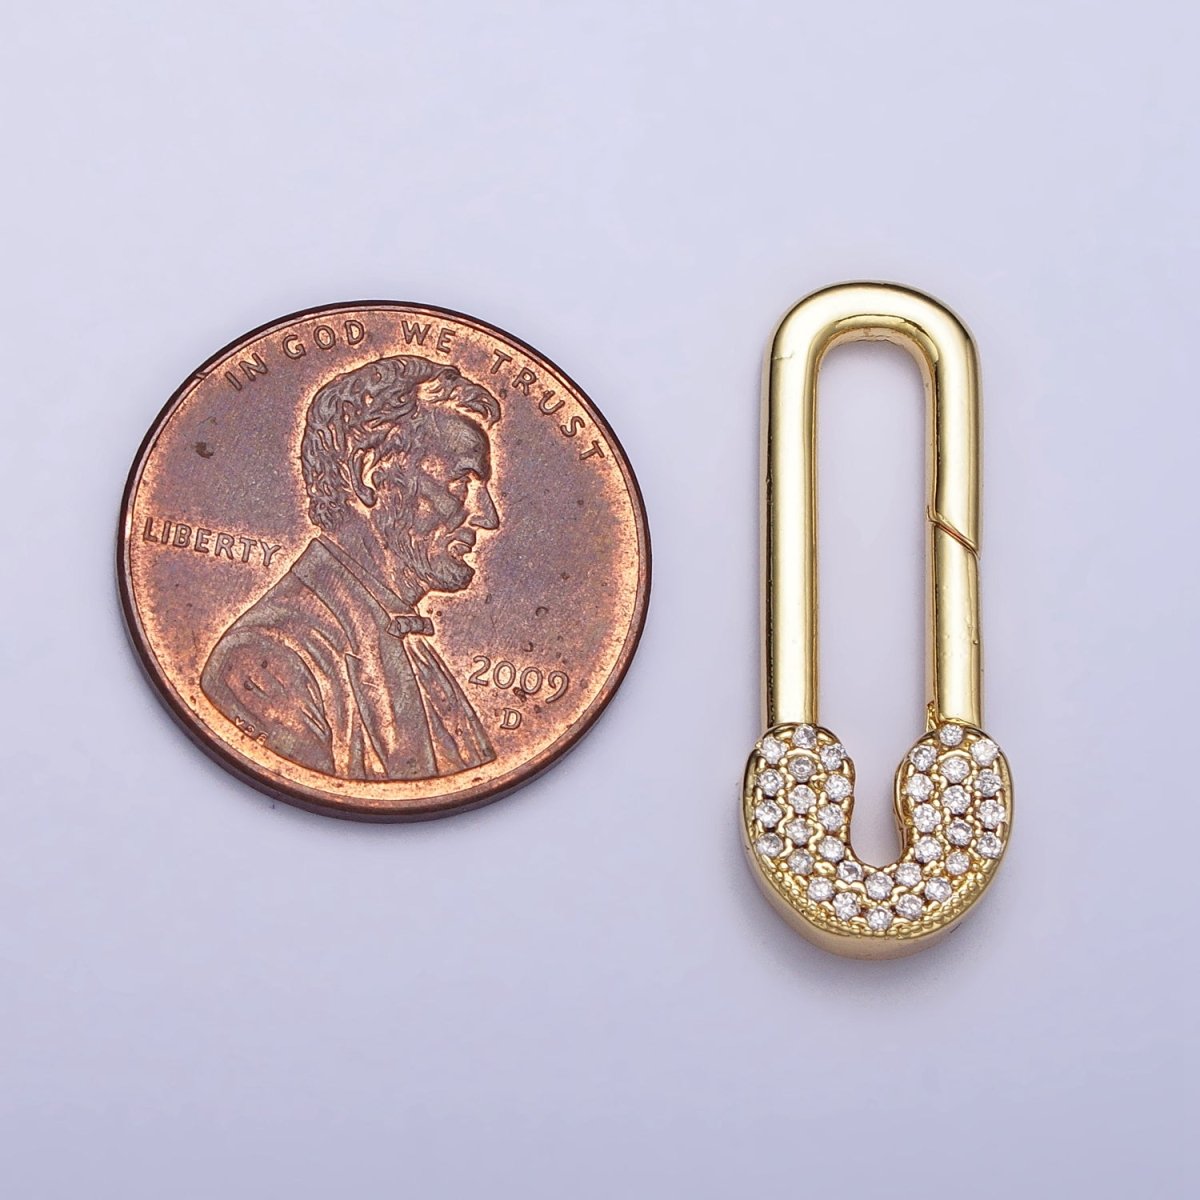 Gold Oval Clasp, Silver Hinged Clasp, Oval Push Clasp Spring Gate Clasp with Micro Pave Safety Pin Clasp Enhancer Z-031 - DLUXCA